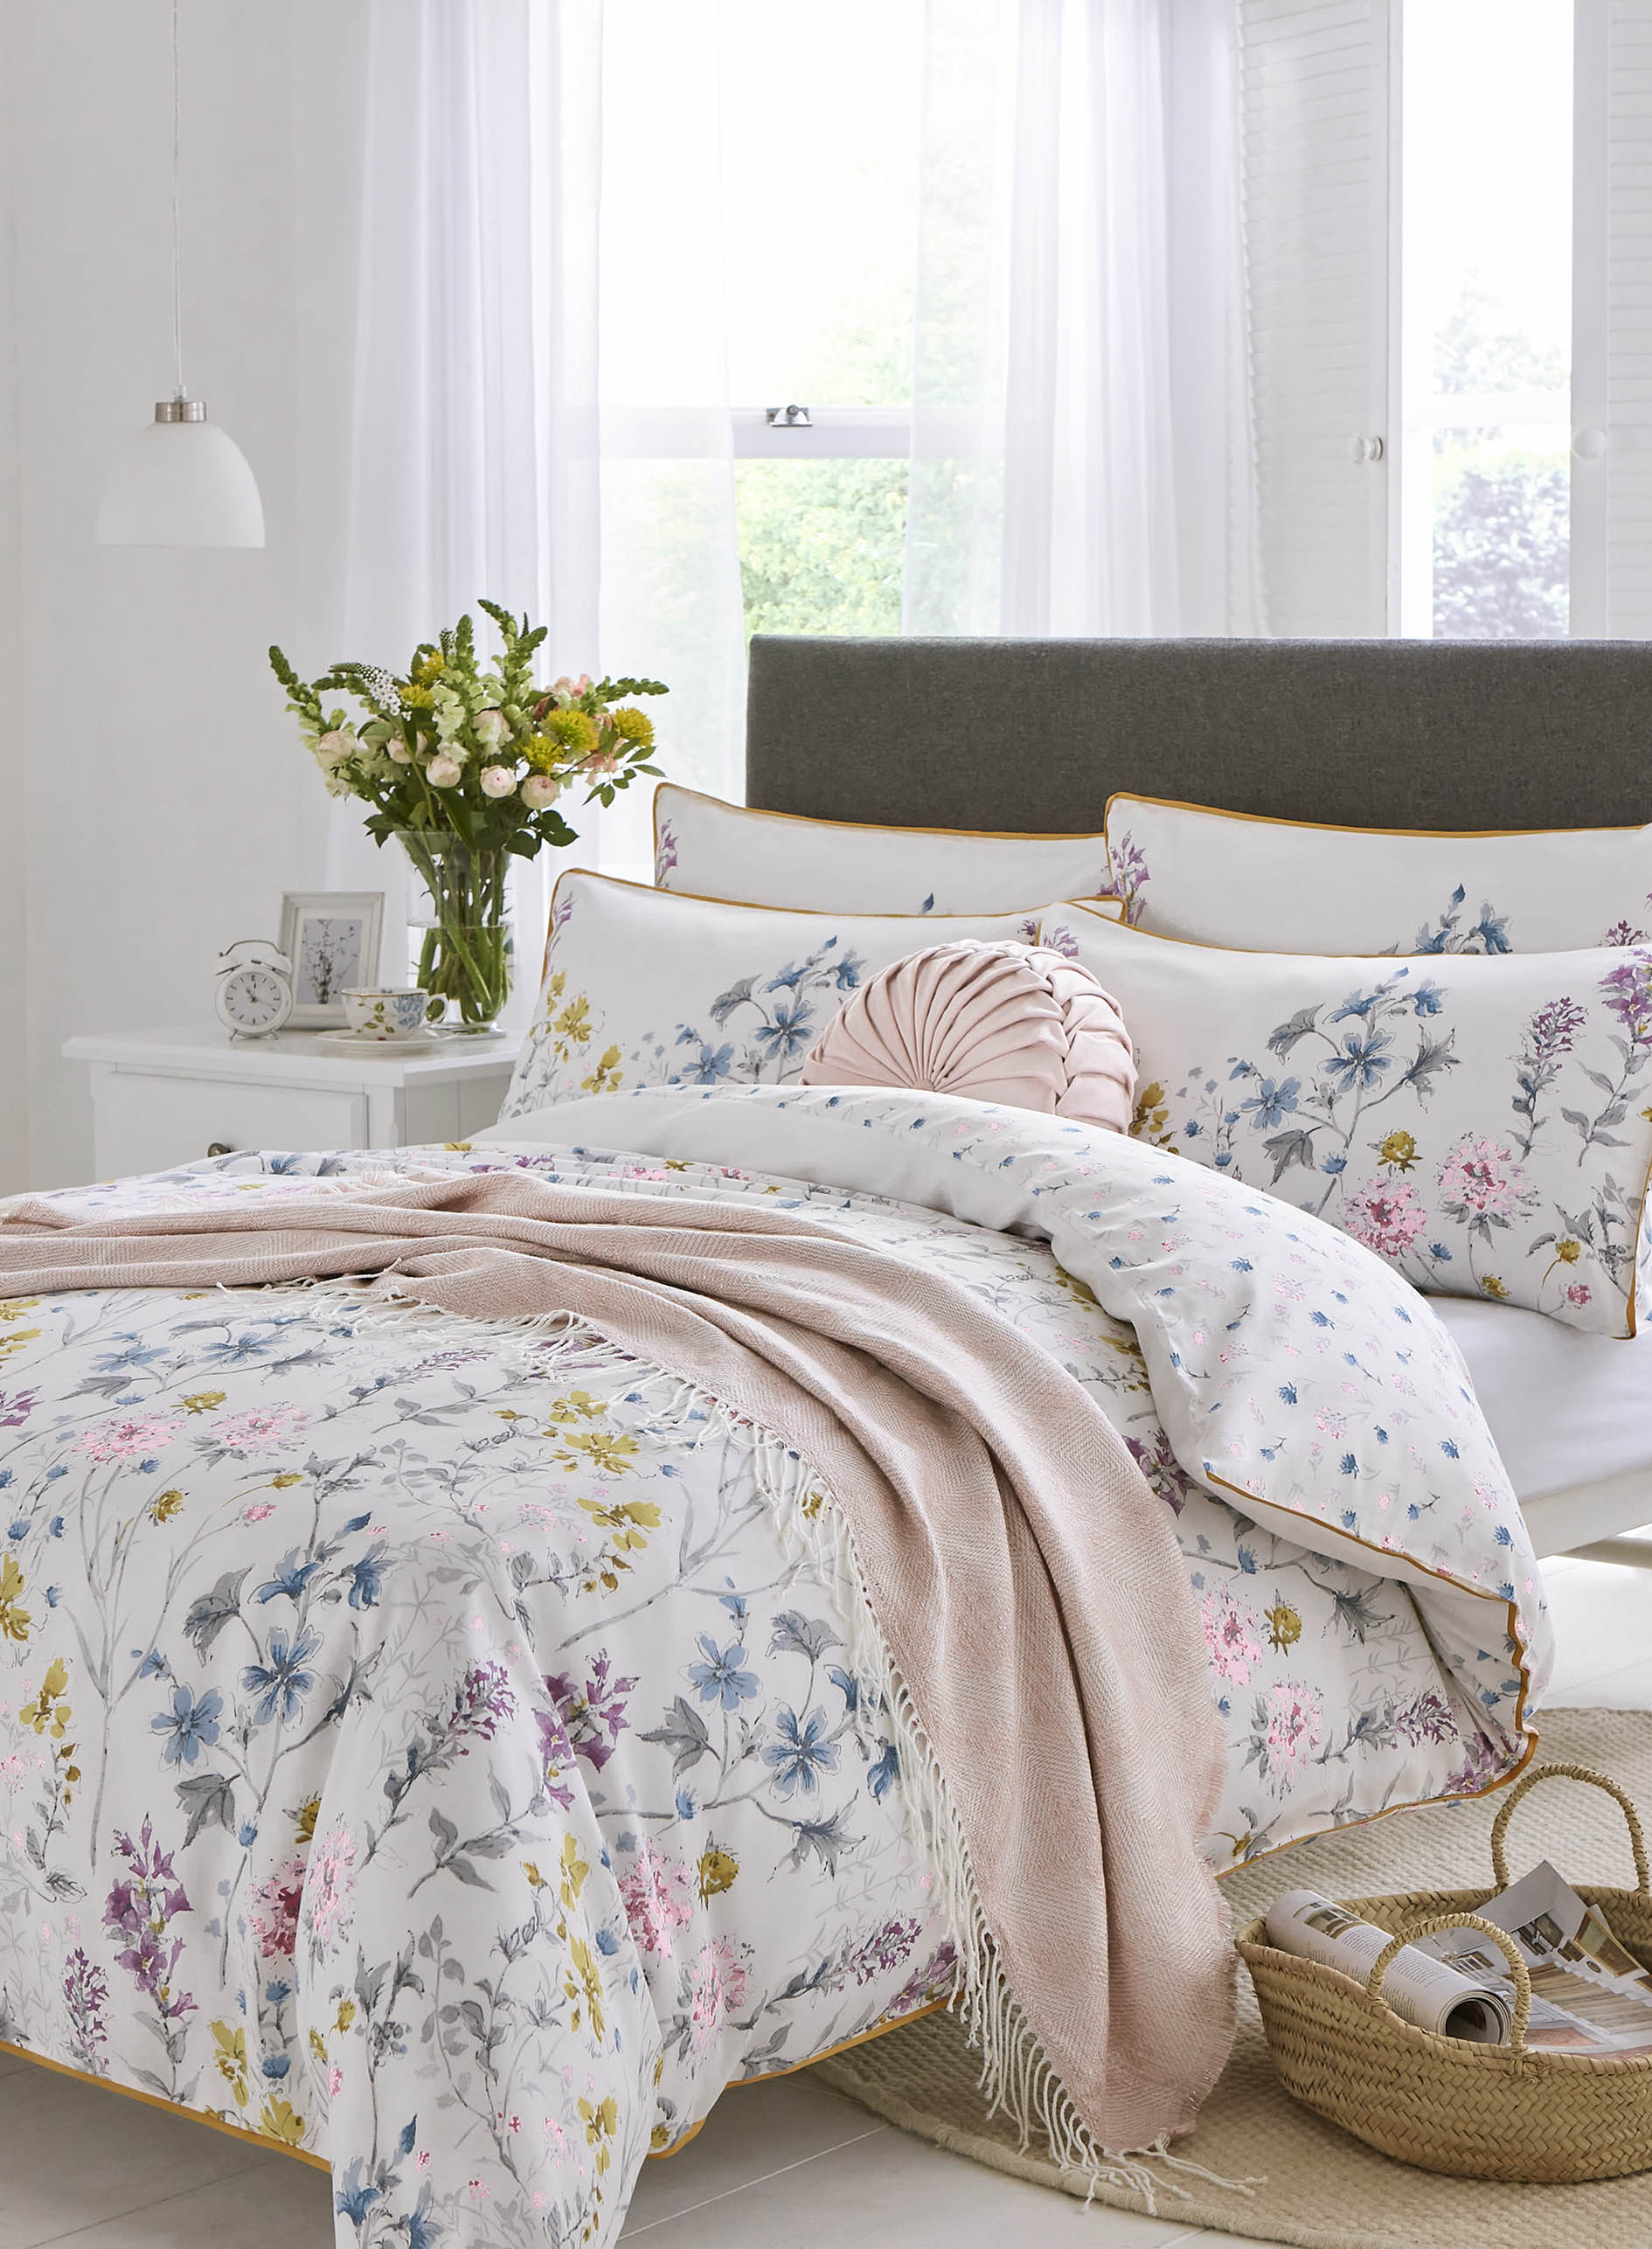 Laura Ashley Wild Meadow Duvet Cover and Pillowcase Set